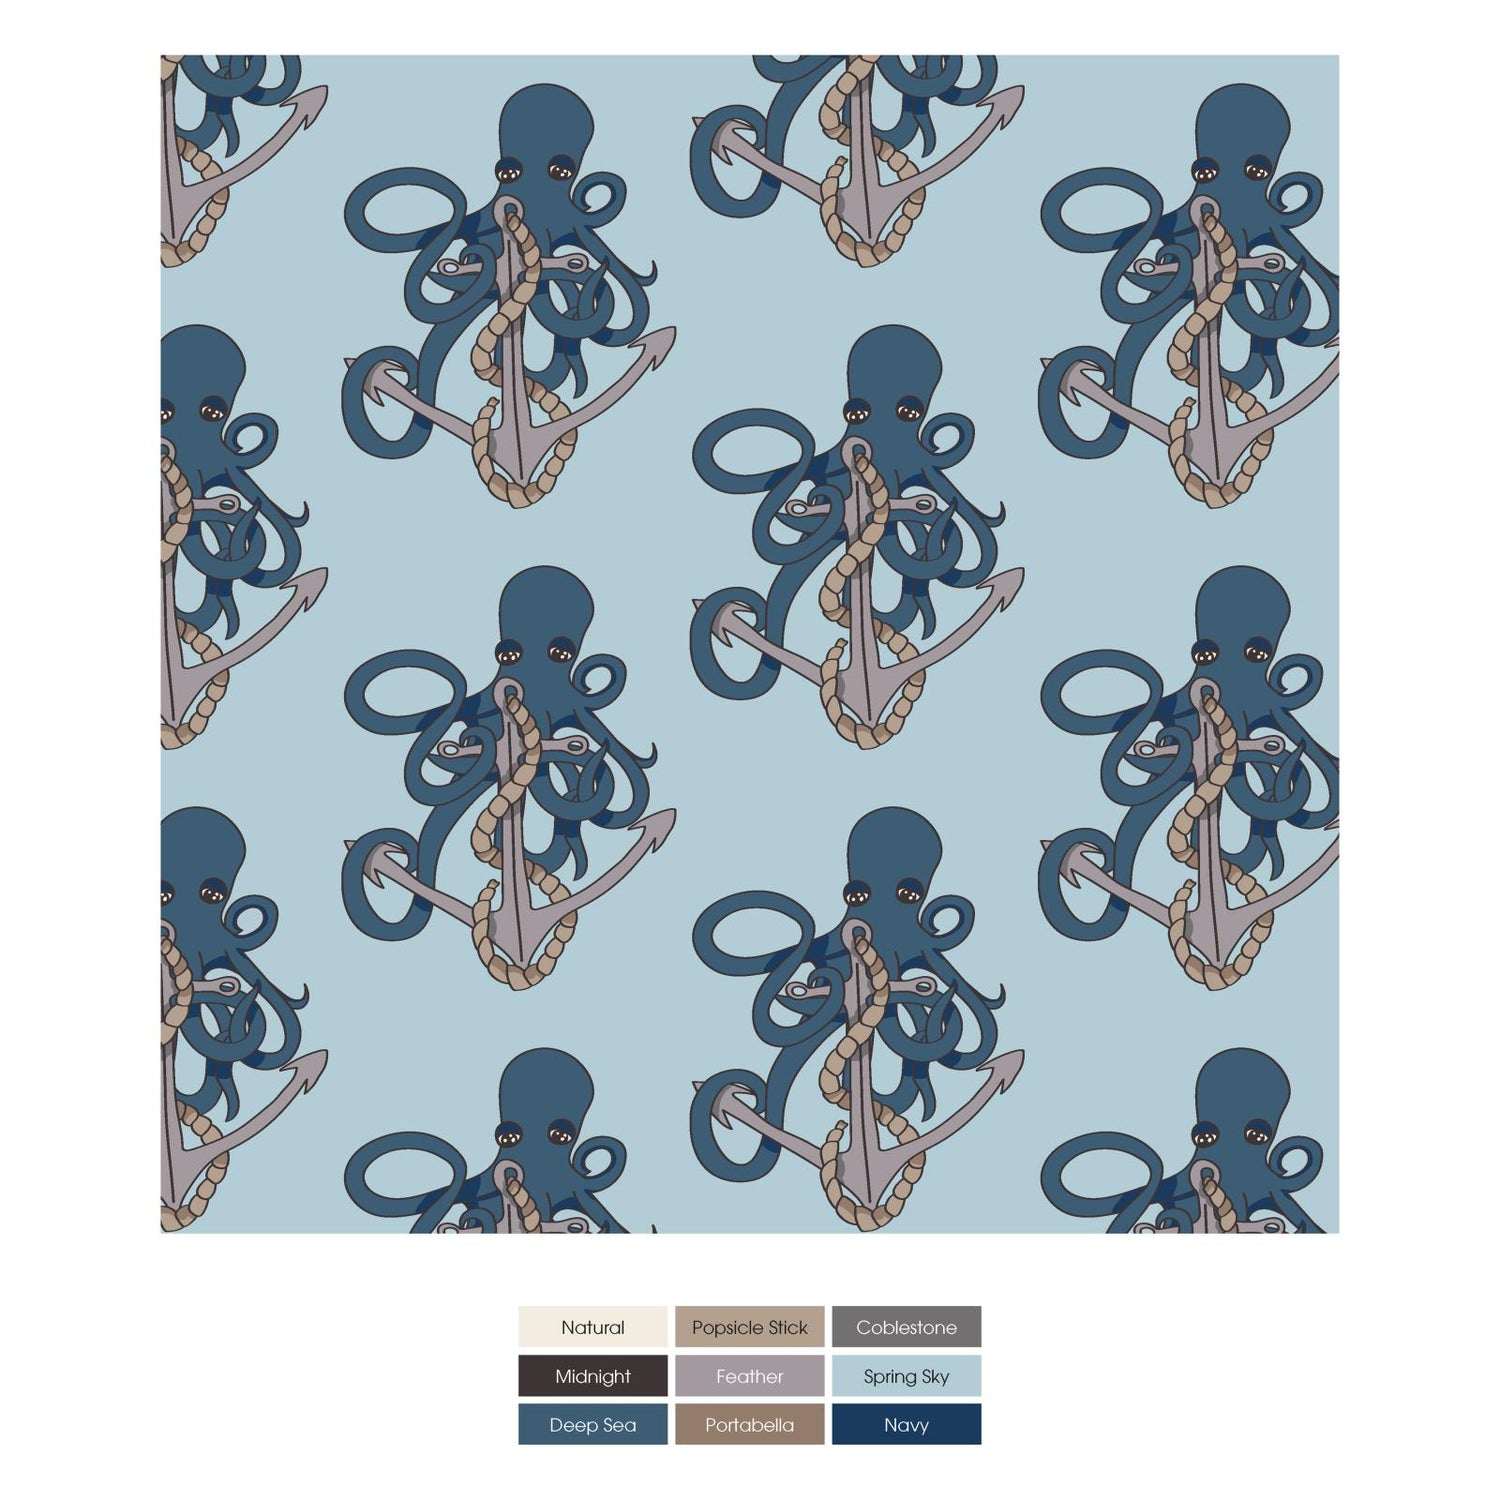 Print Footie with Snaps in Spring Sky Octopus Anchor